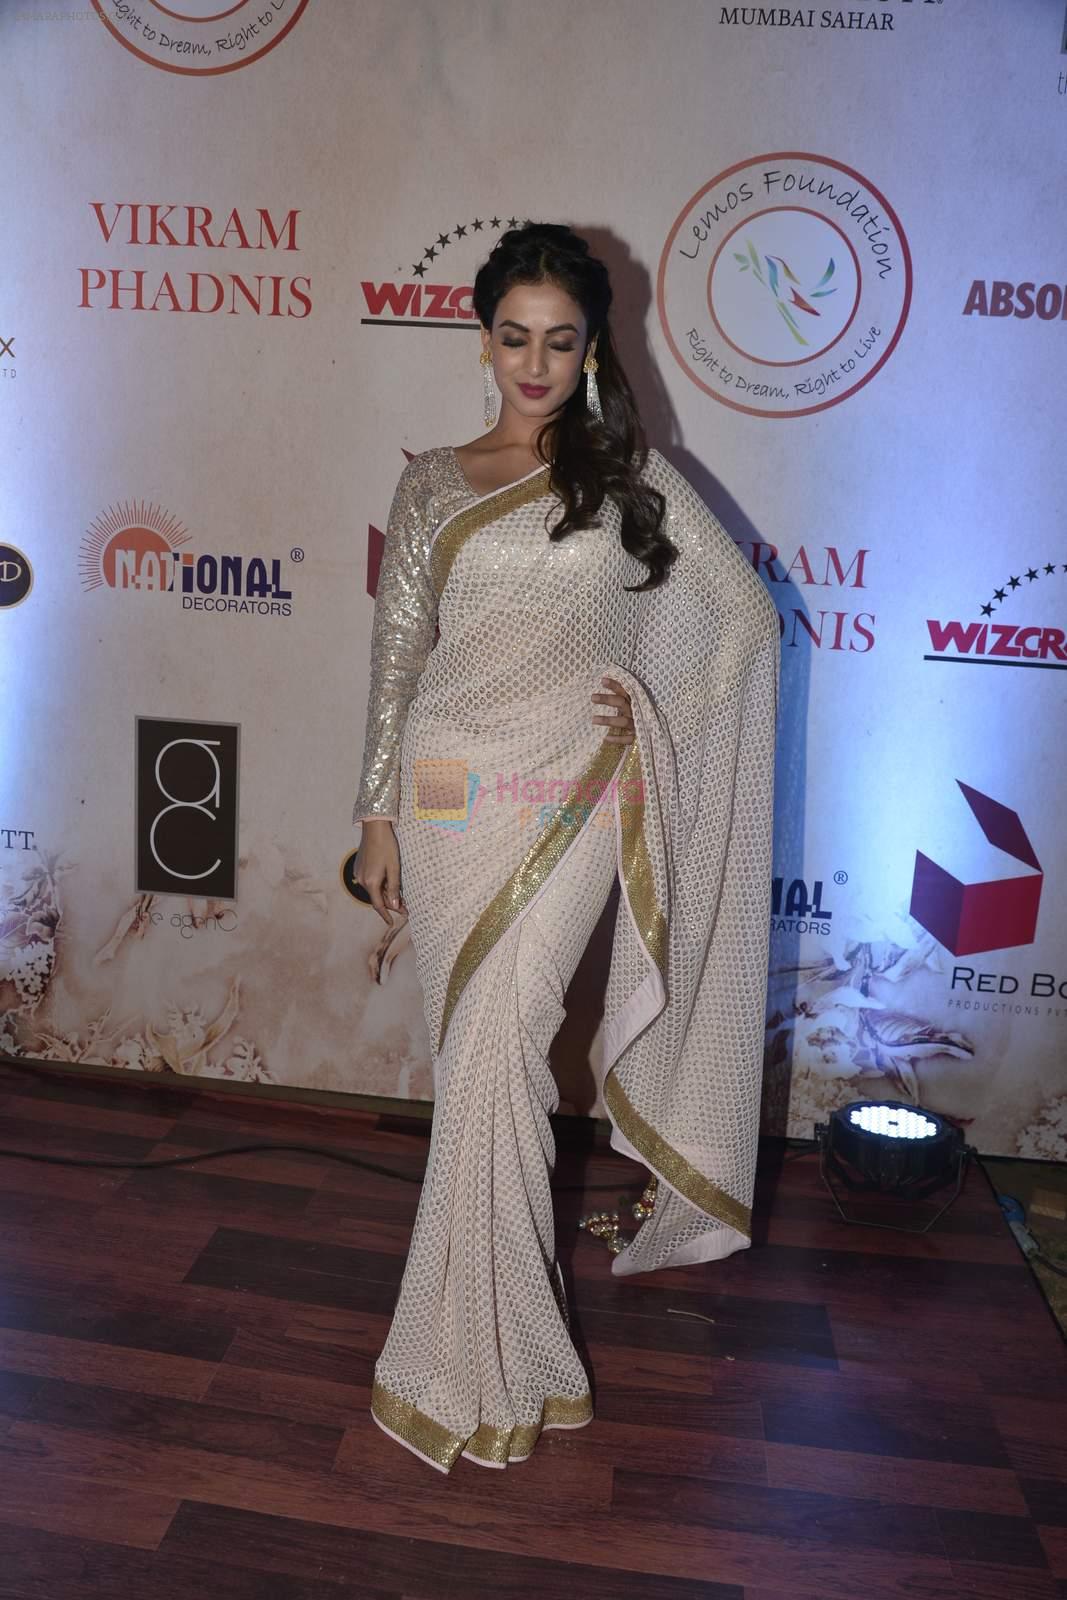 Sonal Chauhan at Vikram Phadnis 25 years show on 16th Jan 2016